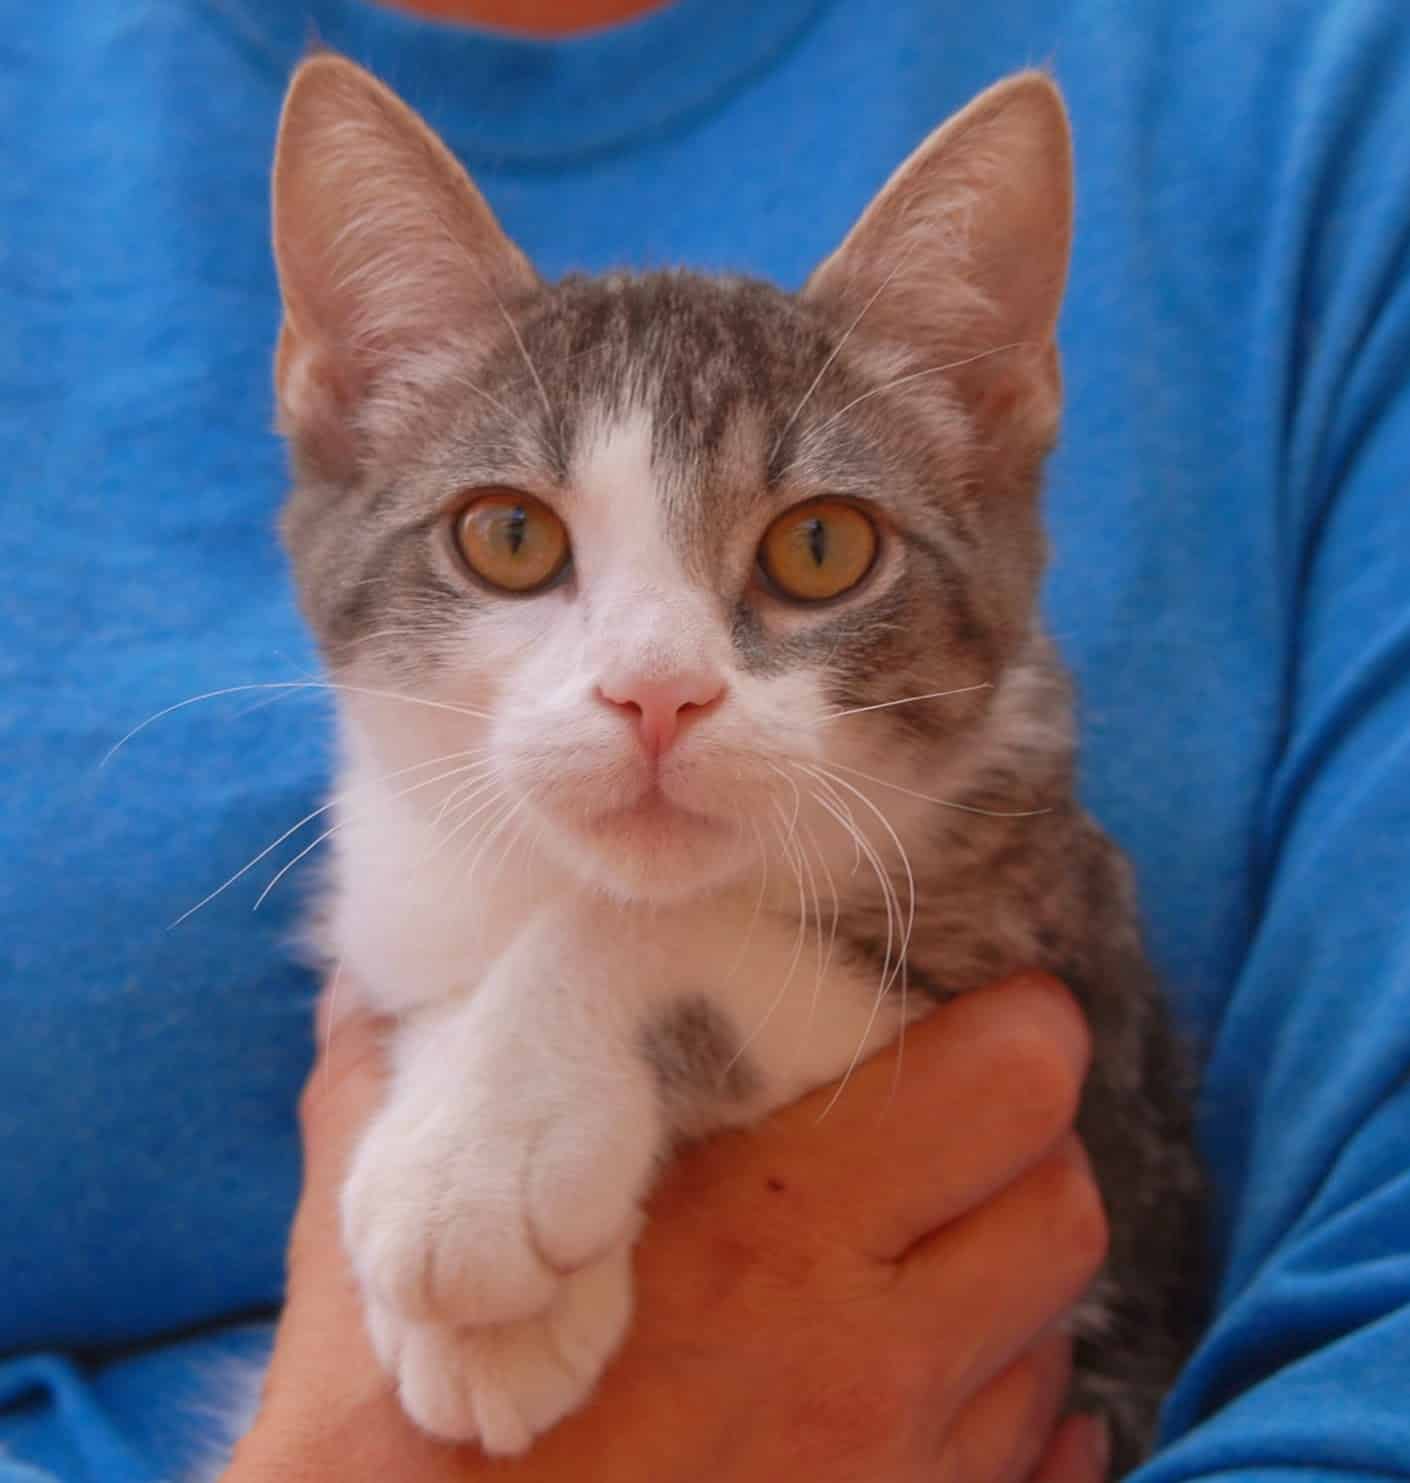 The Acrobatic Kittens are debuting for adoption!